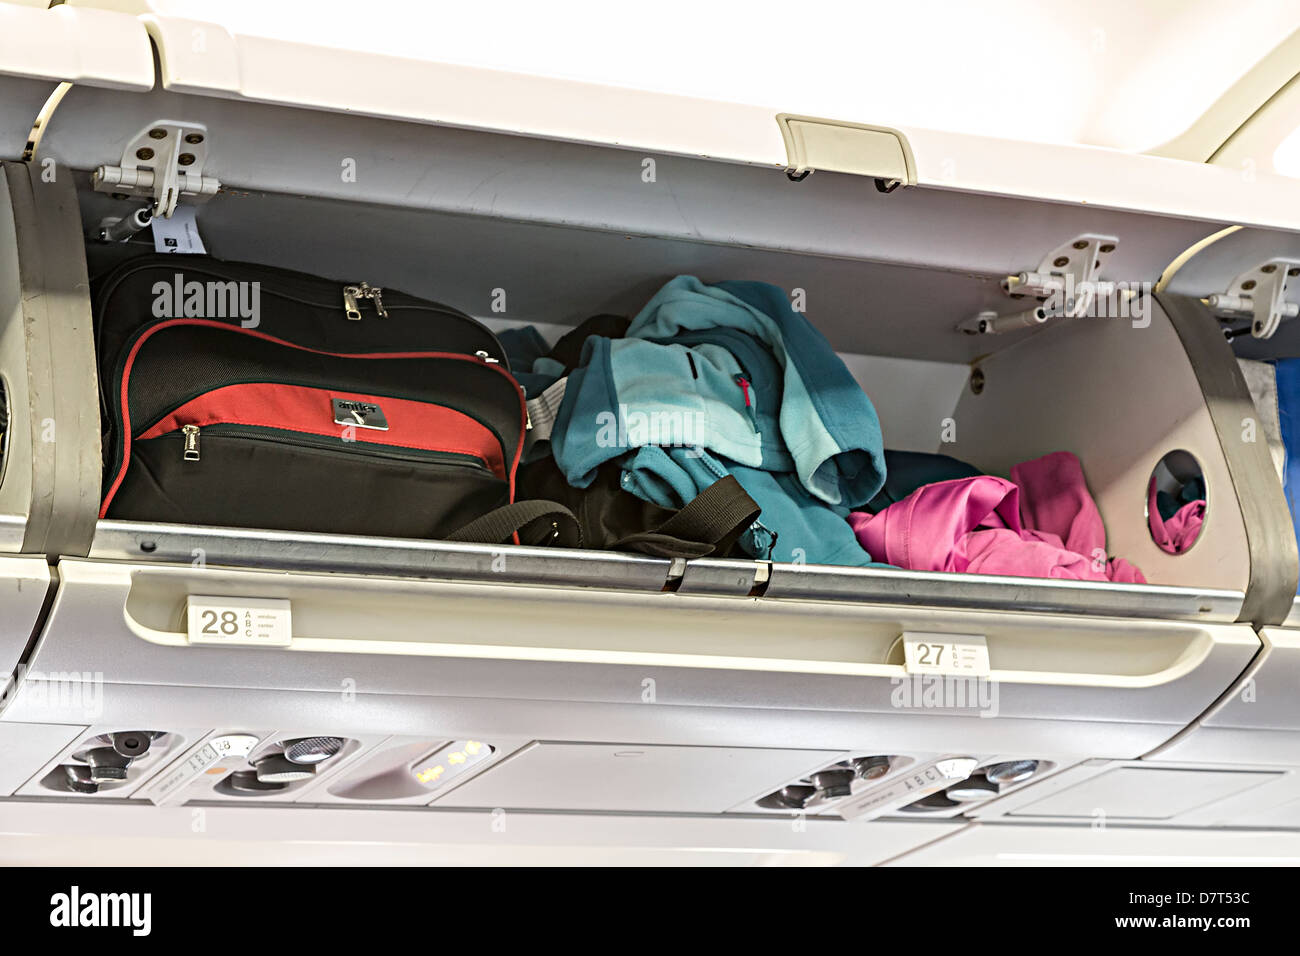 Bags and coats in an overhead locker on an aircraft preparing for flight, Spain Stock Photo